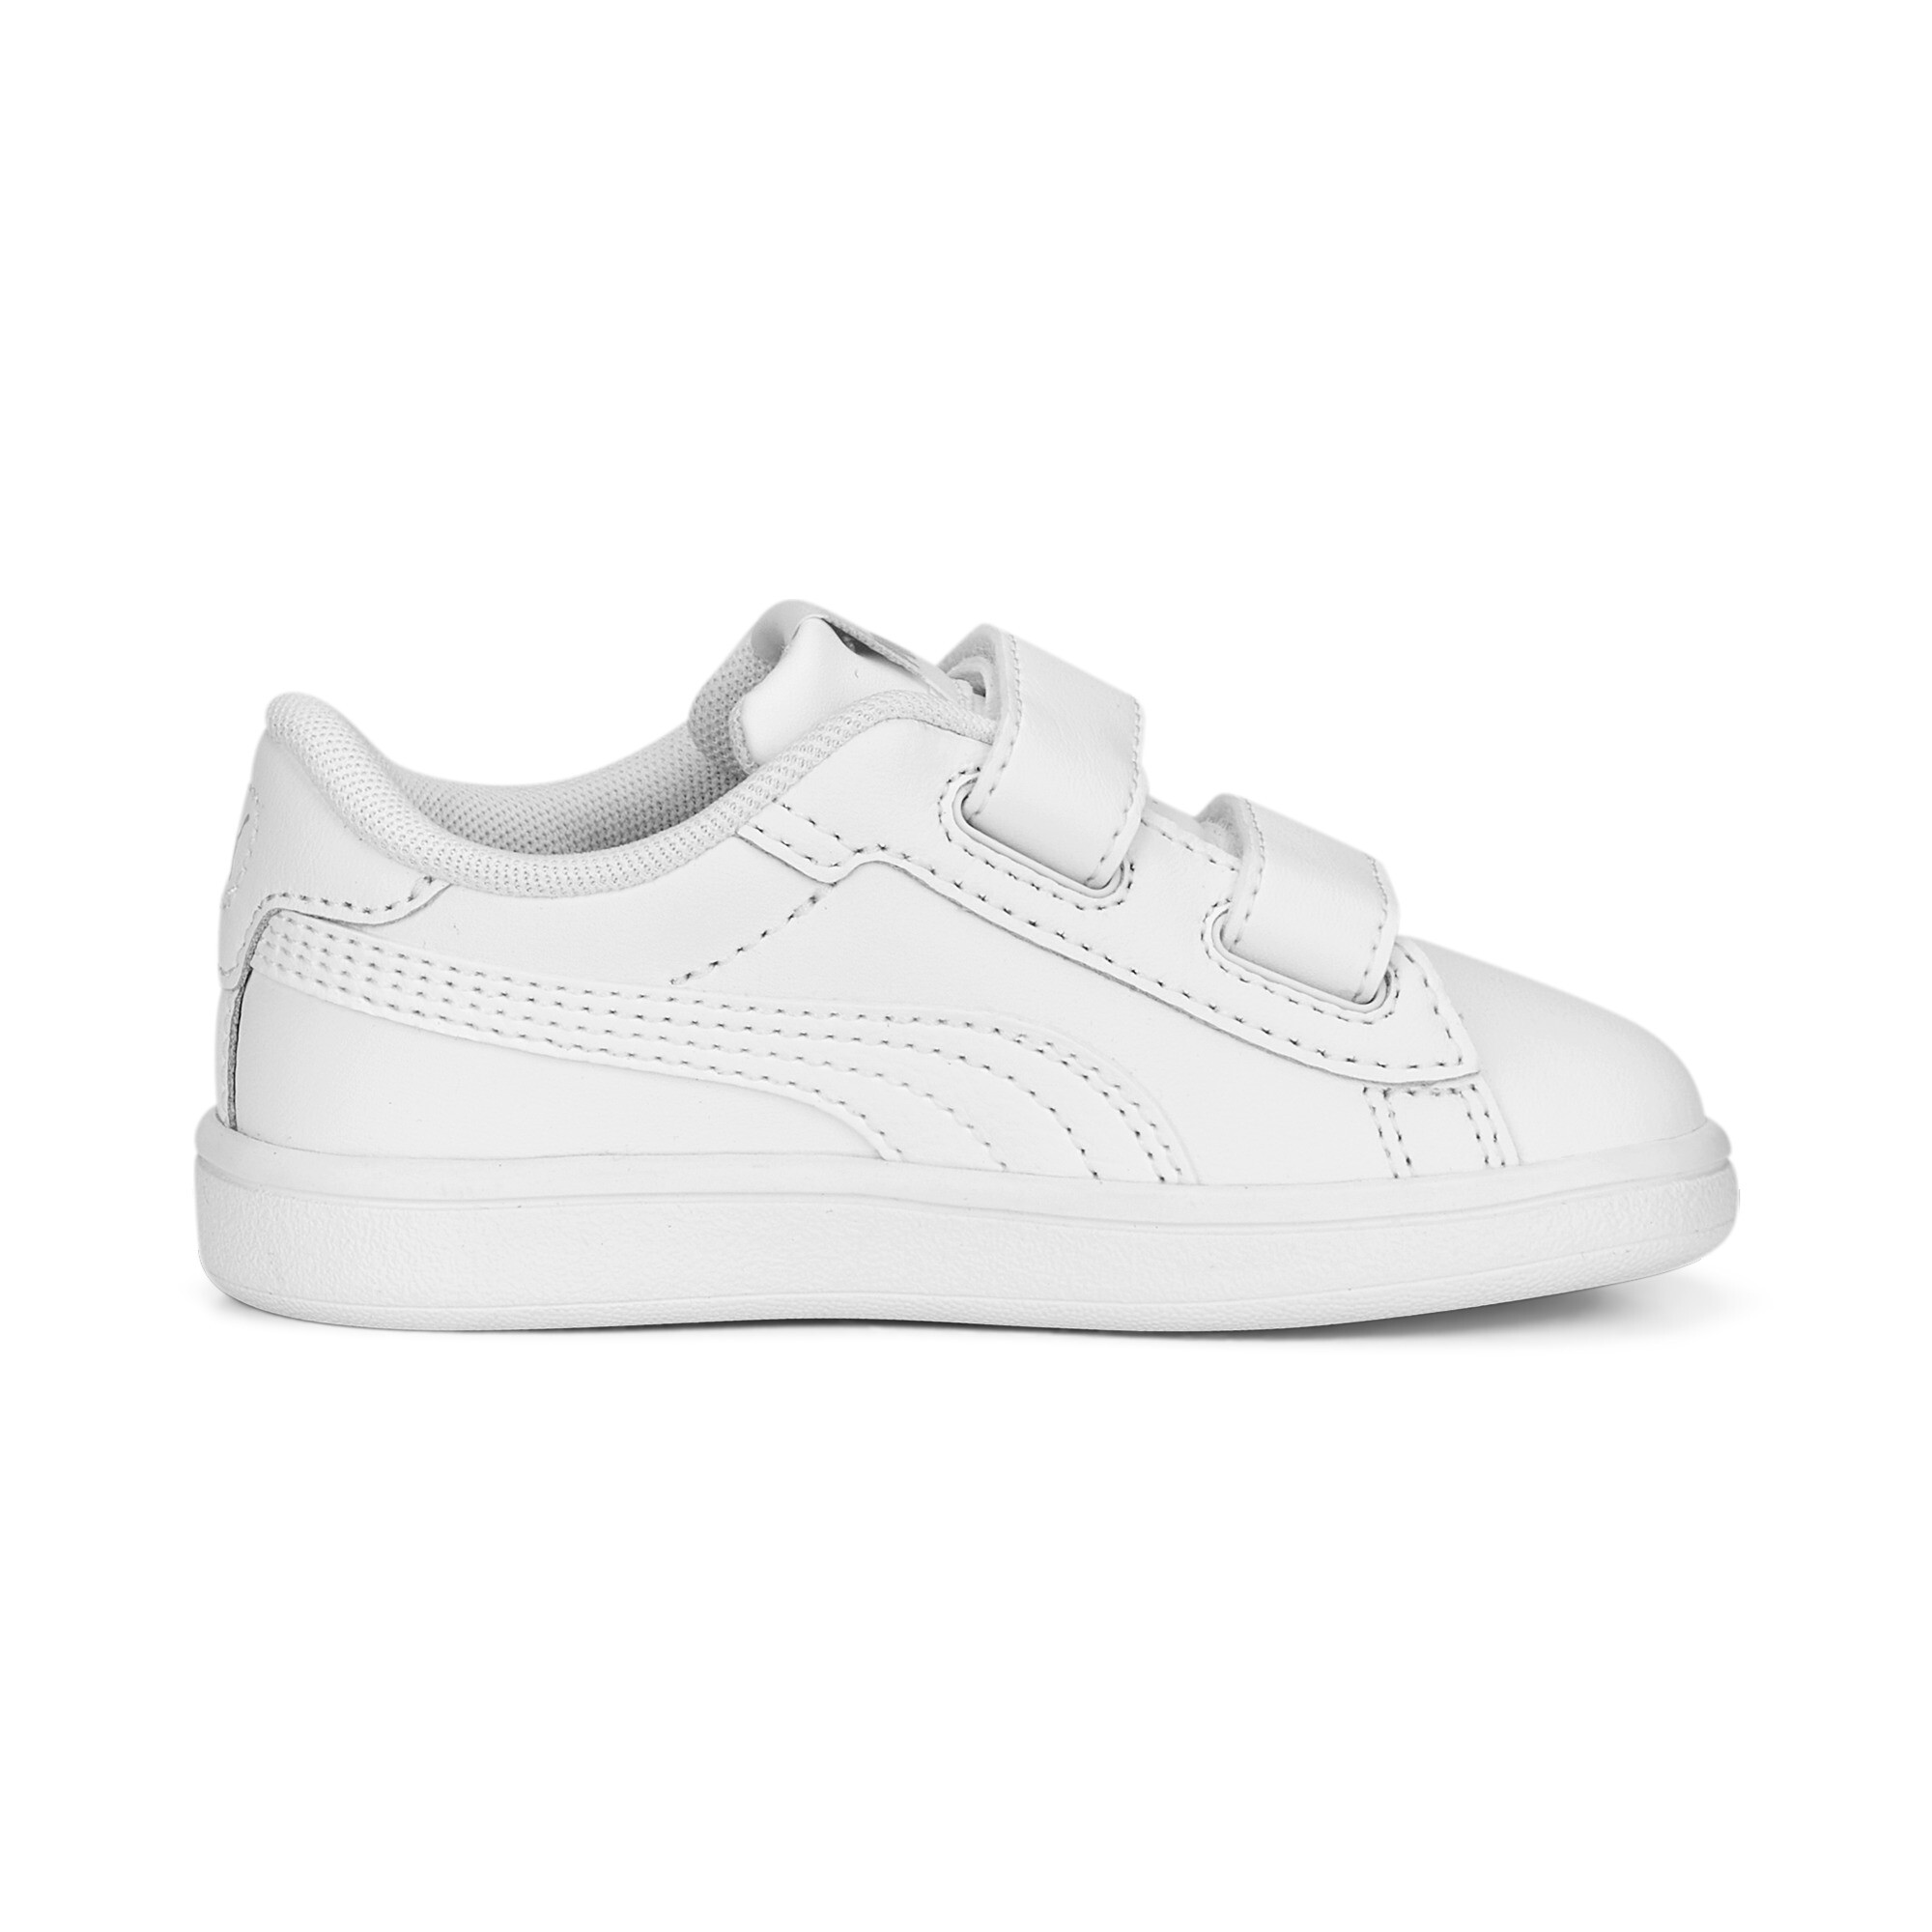 Kids' PUMA Smash 3.0 Leather V Sneakers Baby In White, Size EU 27